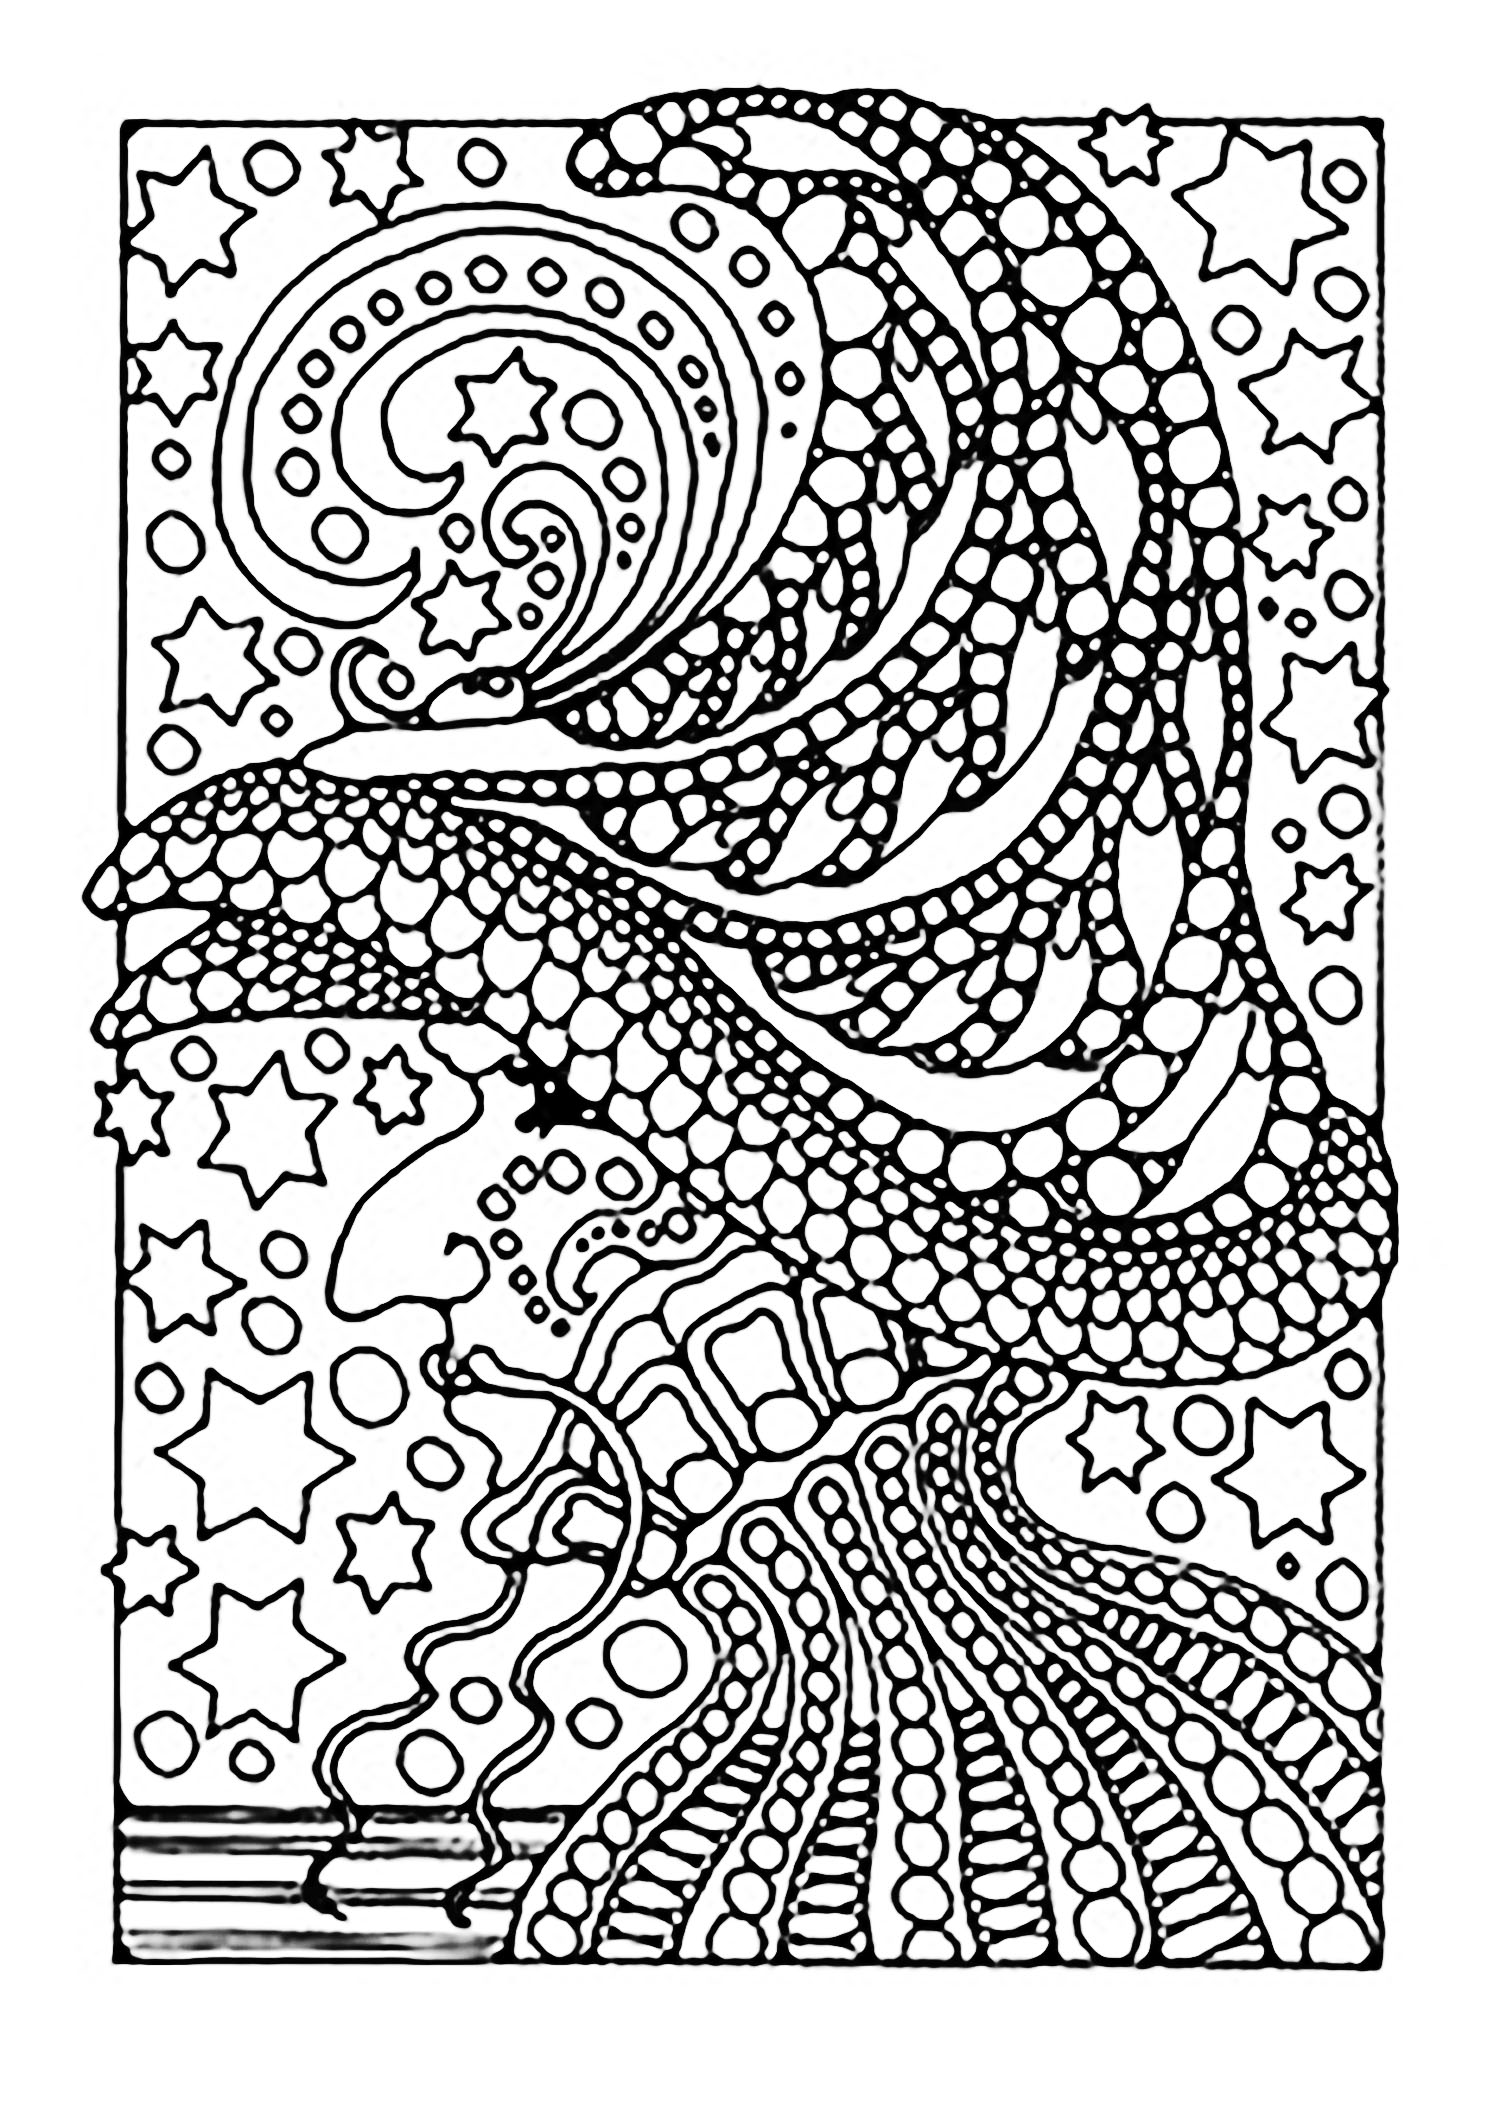 Halloween witch and stars - Halloween Adult Coloring Pages